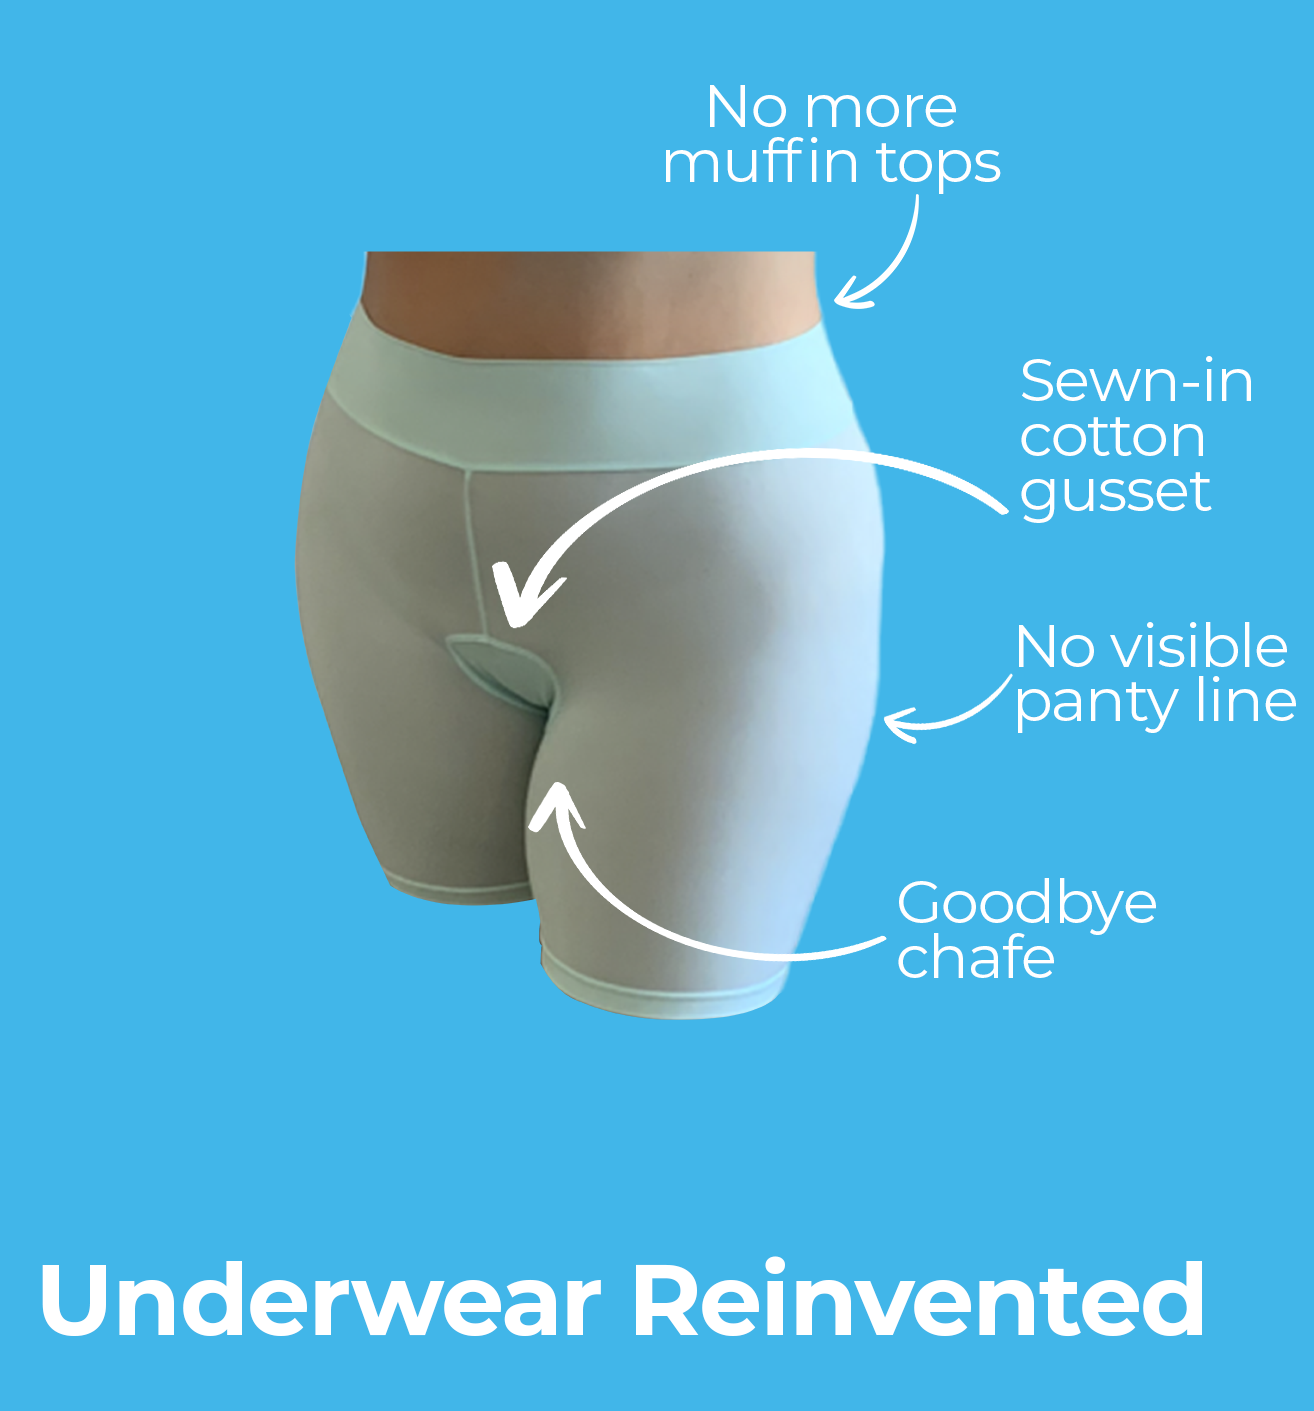 Diagram Showing the benefits of Skanties: No more muffin tops points to waistband with smooth lines, Sewn-in cotton gusset pointing to the extra large cotton underwear panel , no visible panty line pointing to the smooth lines on the side of the thigh, Goodbye chafe pointing to the thigh area where the silk fabric prevents chafing 